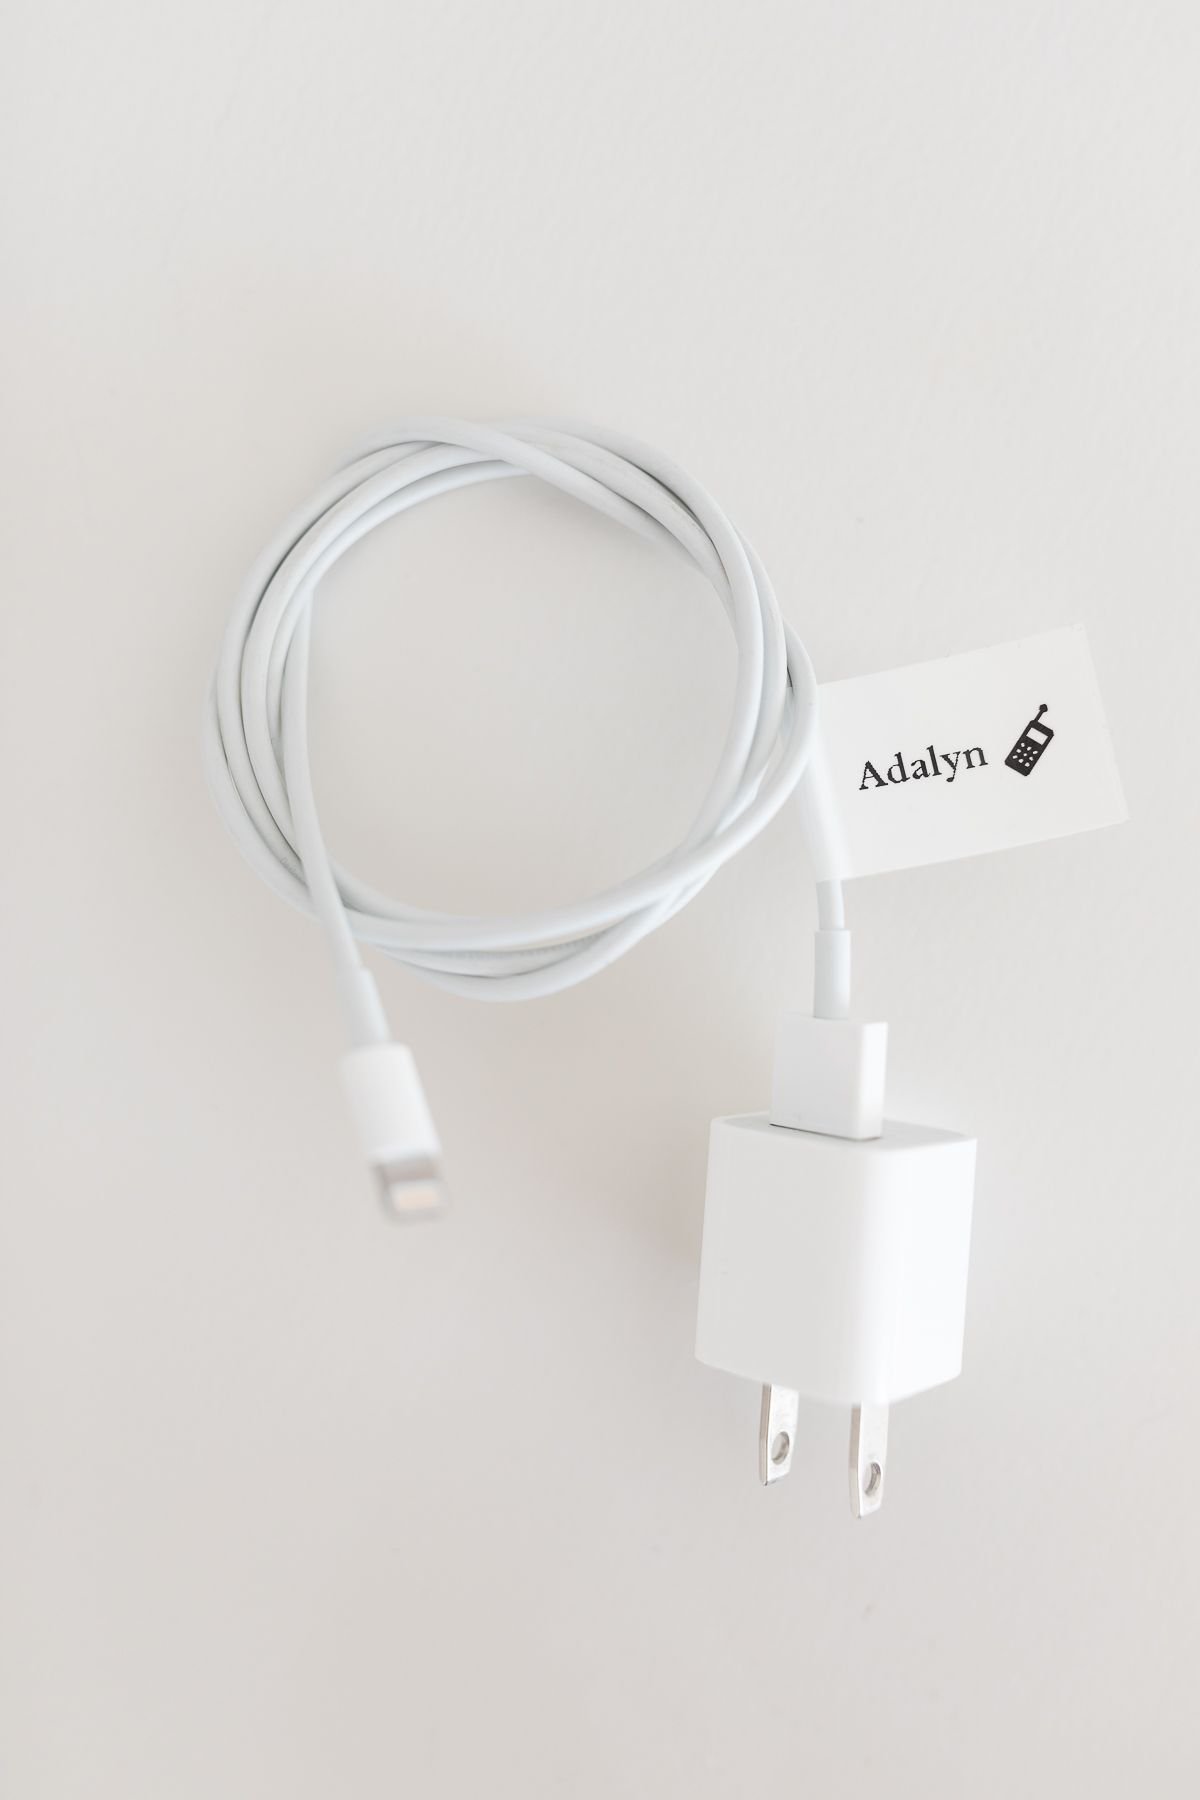 A white phone charger cord with a label for nightstand organization